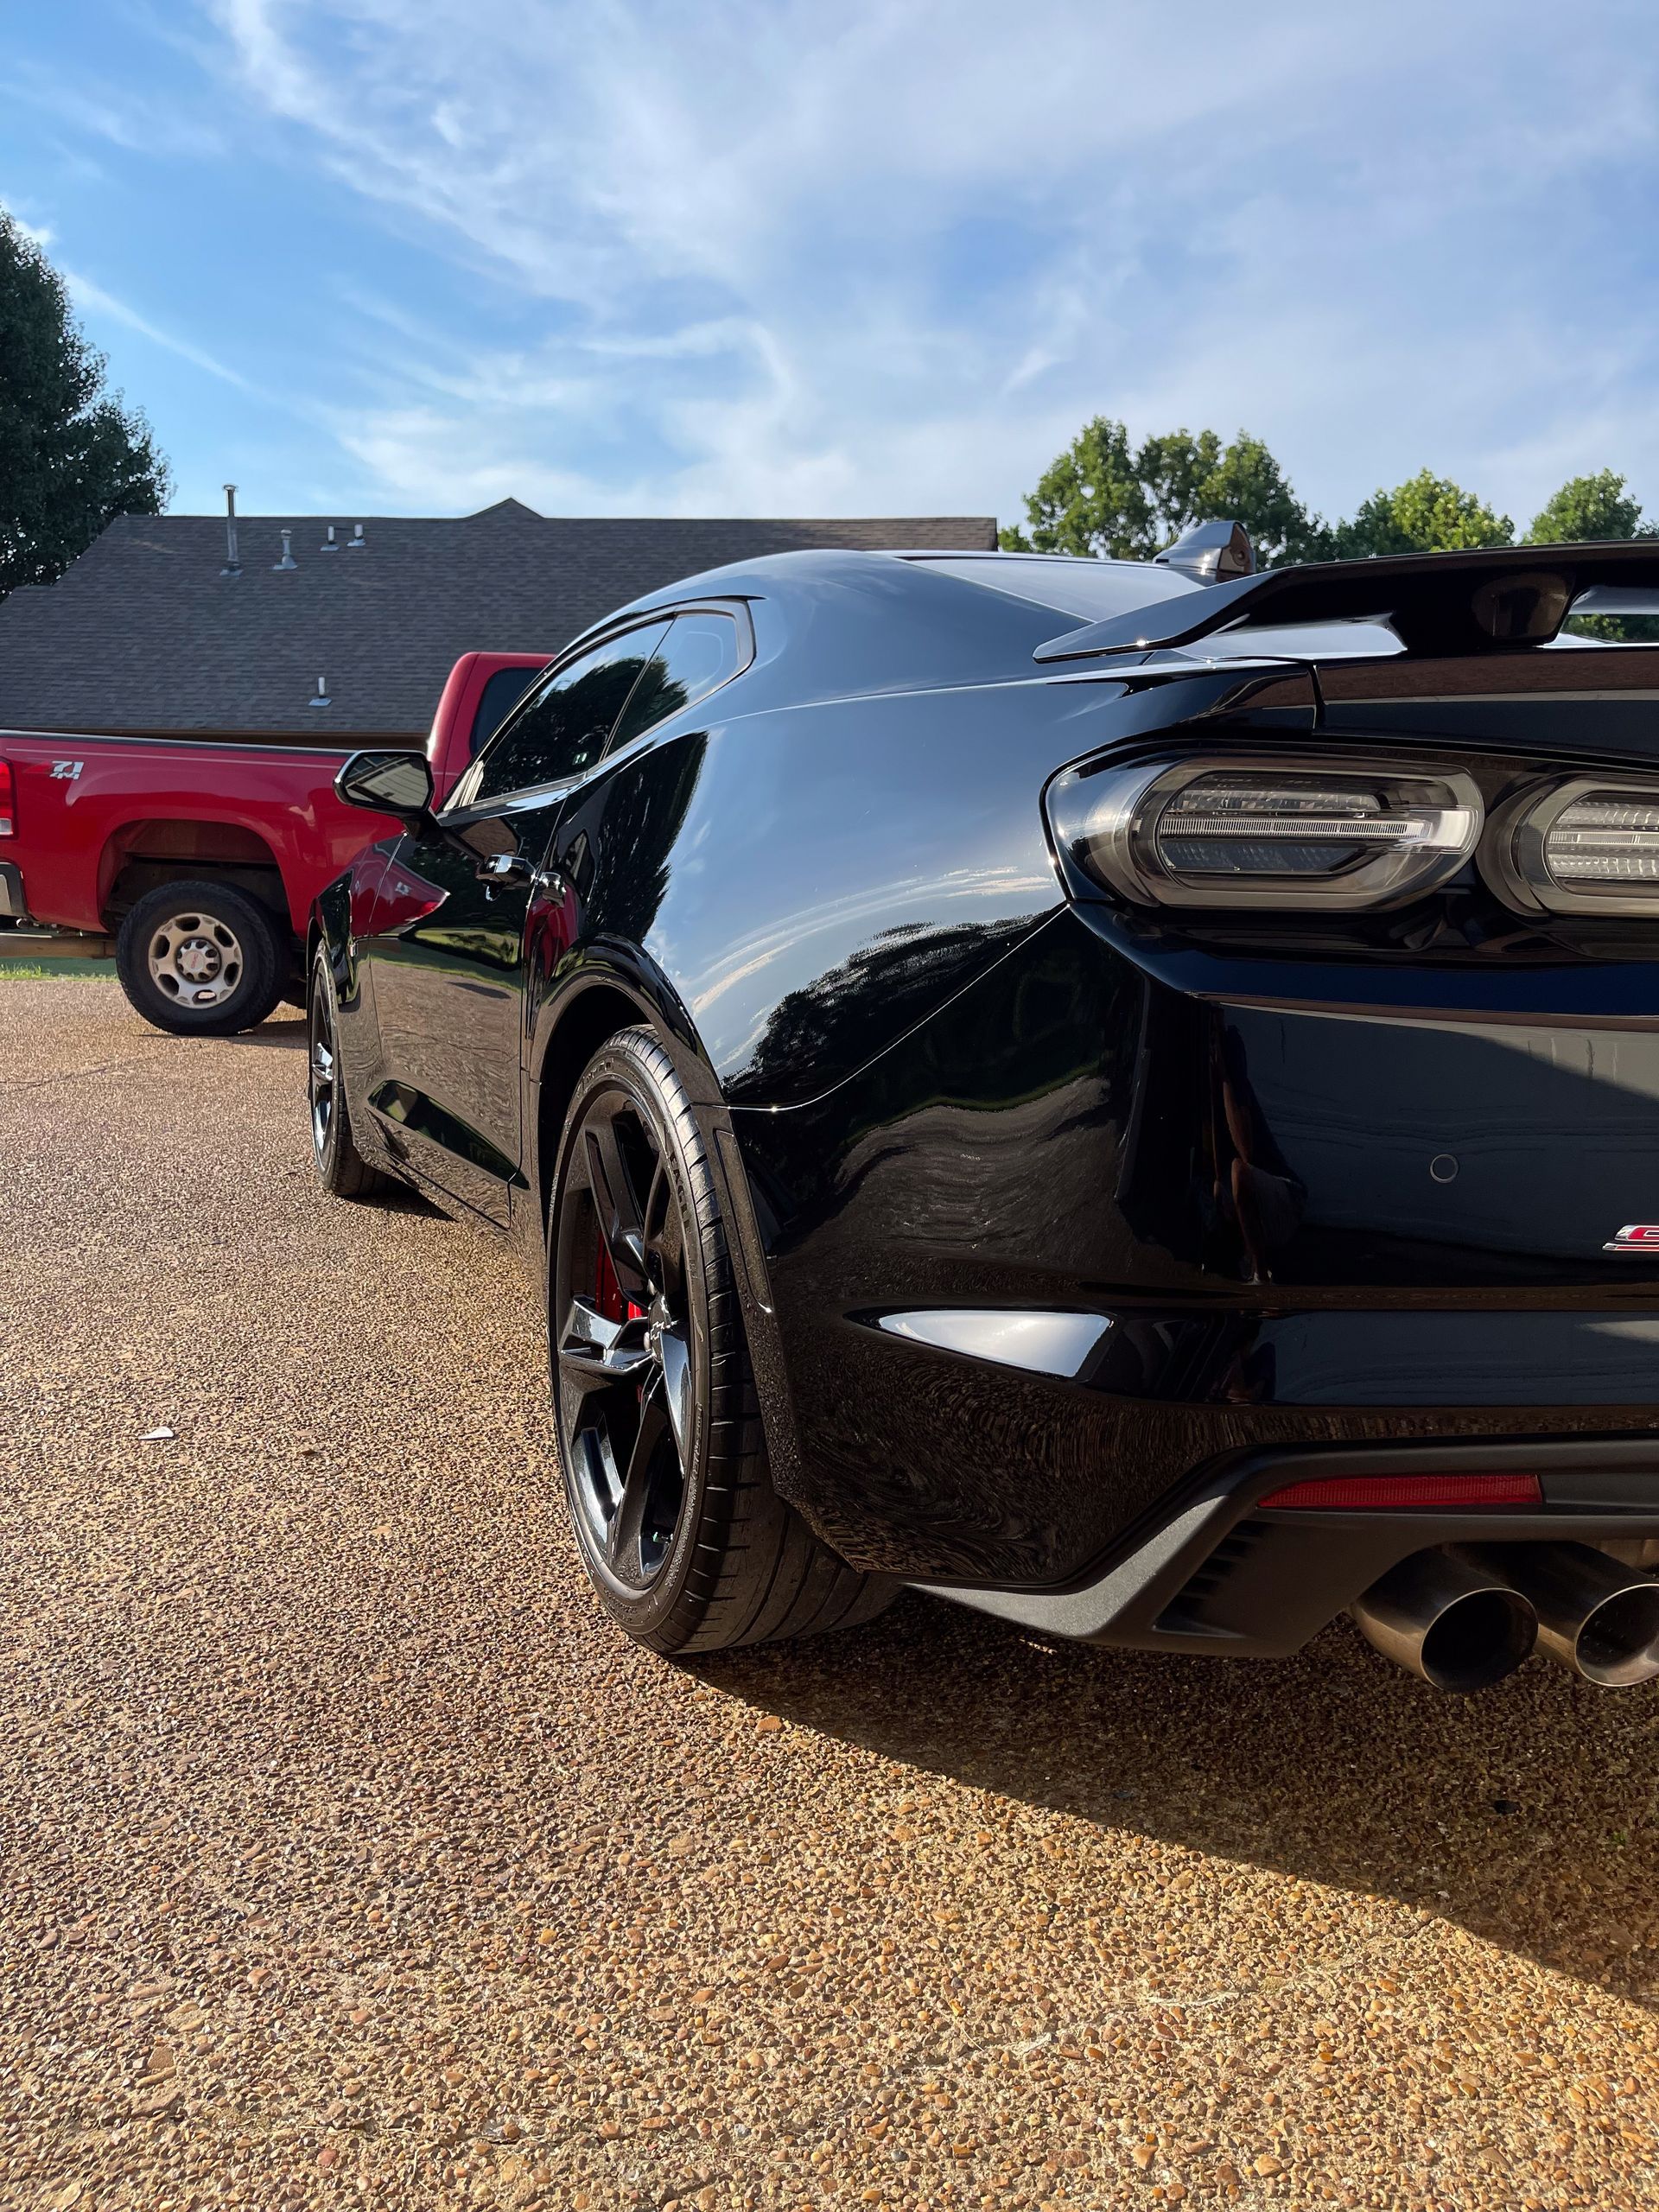 a black sports car is parked in a gravel driveway next to a red truck.